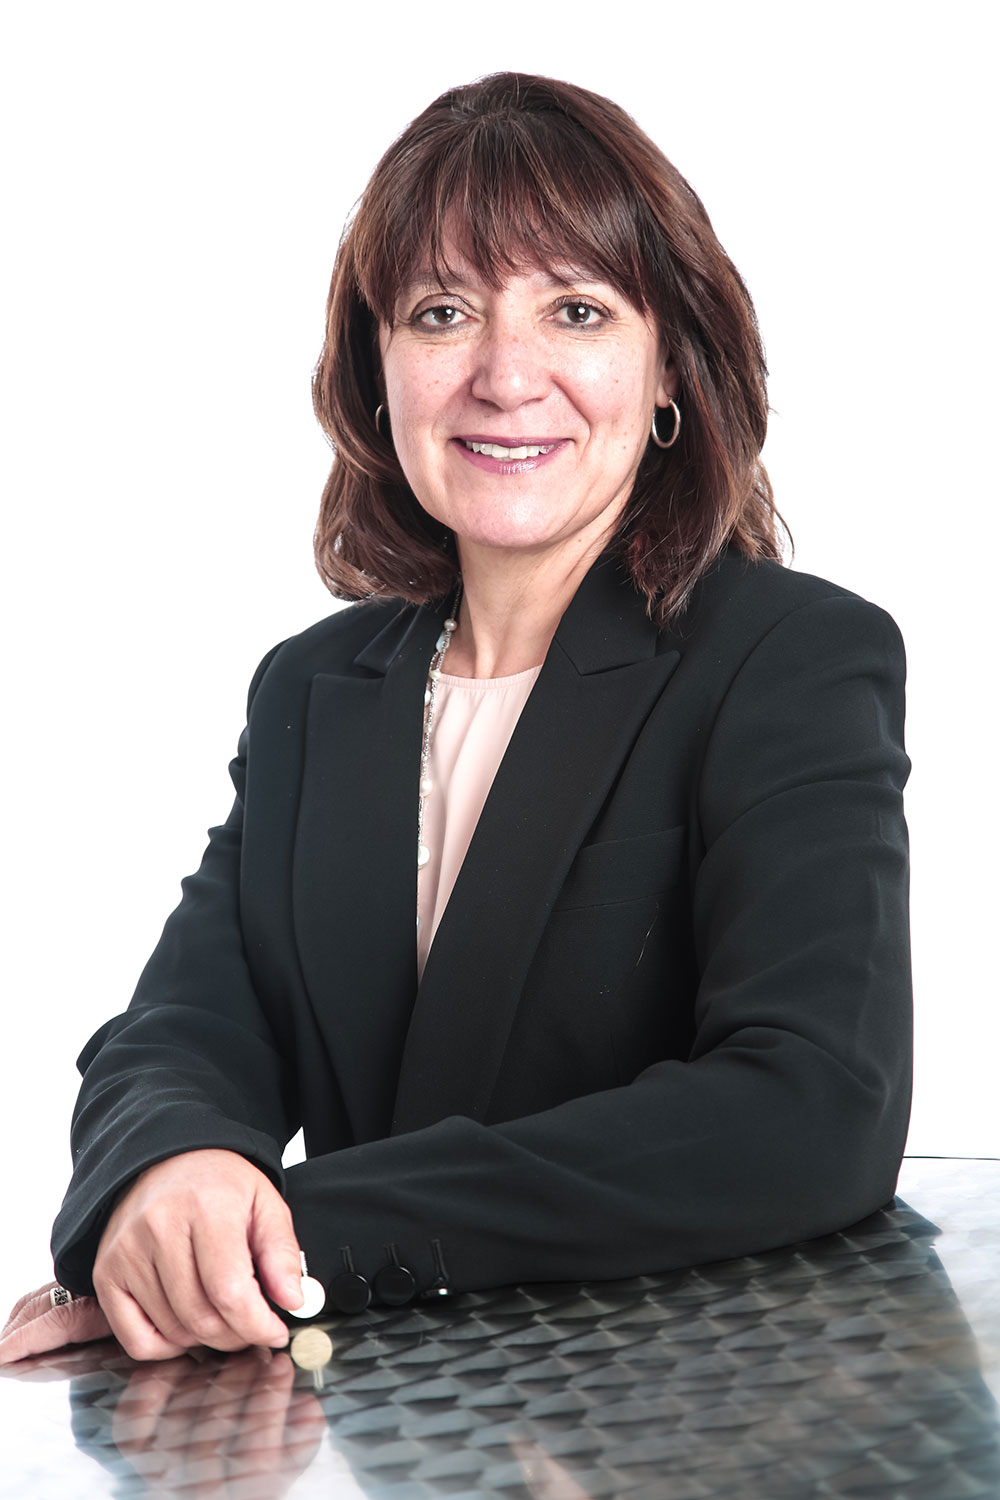 Cathy Smith appointed the new Managing Director at SAP Africa